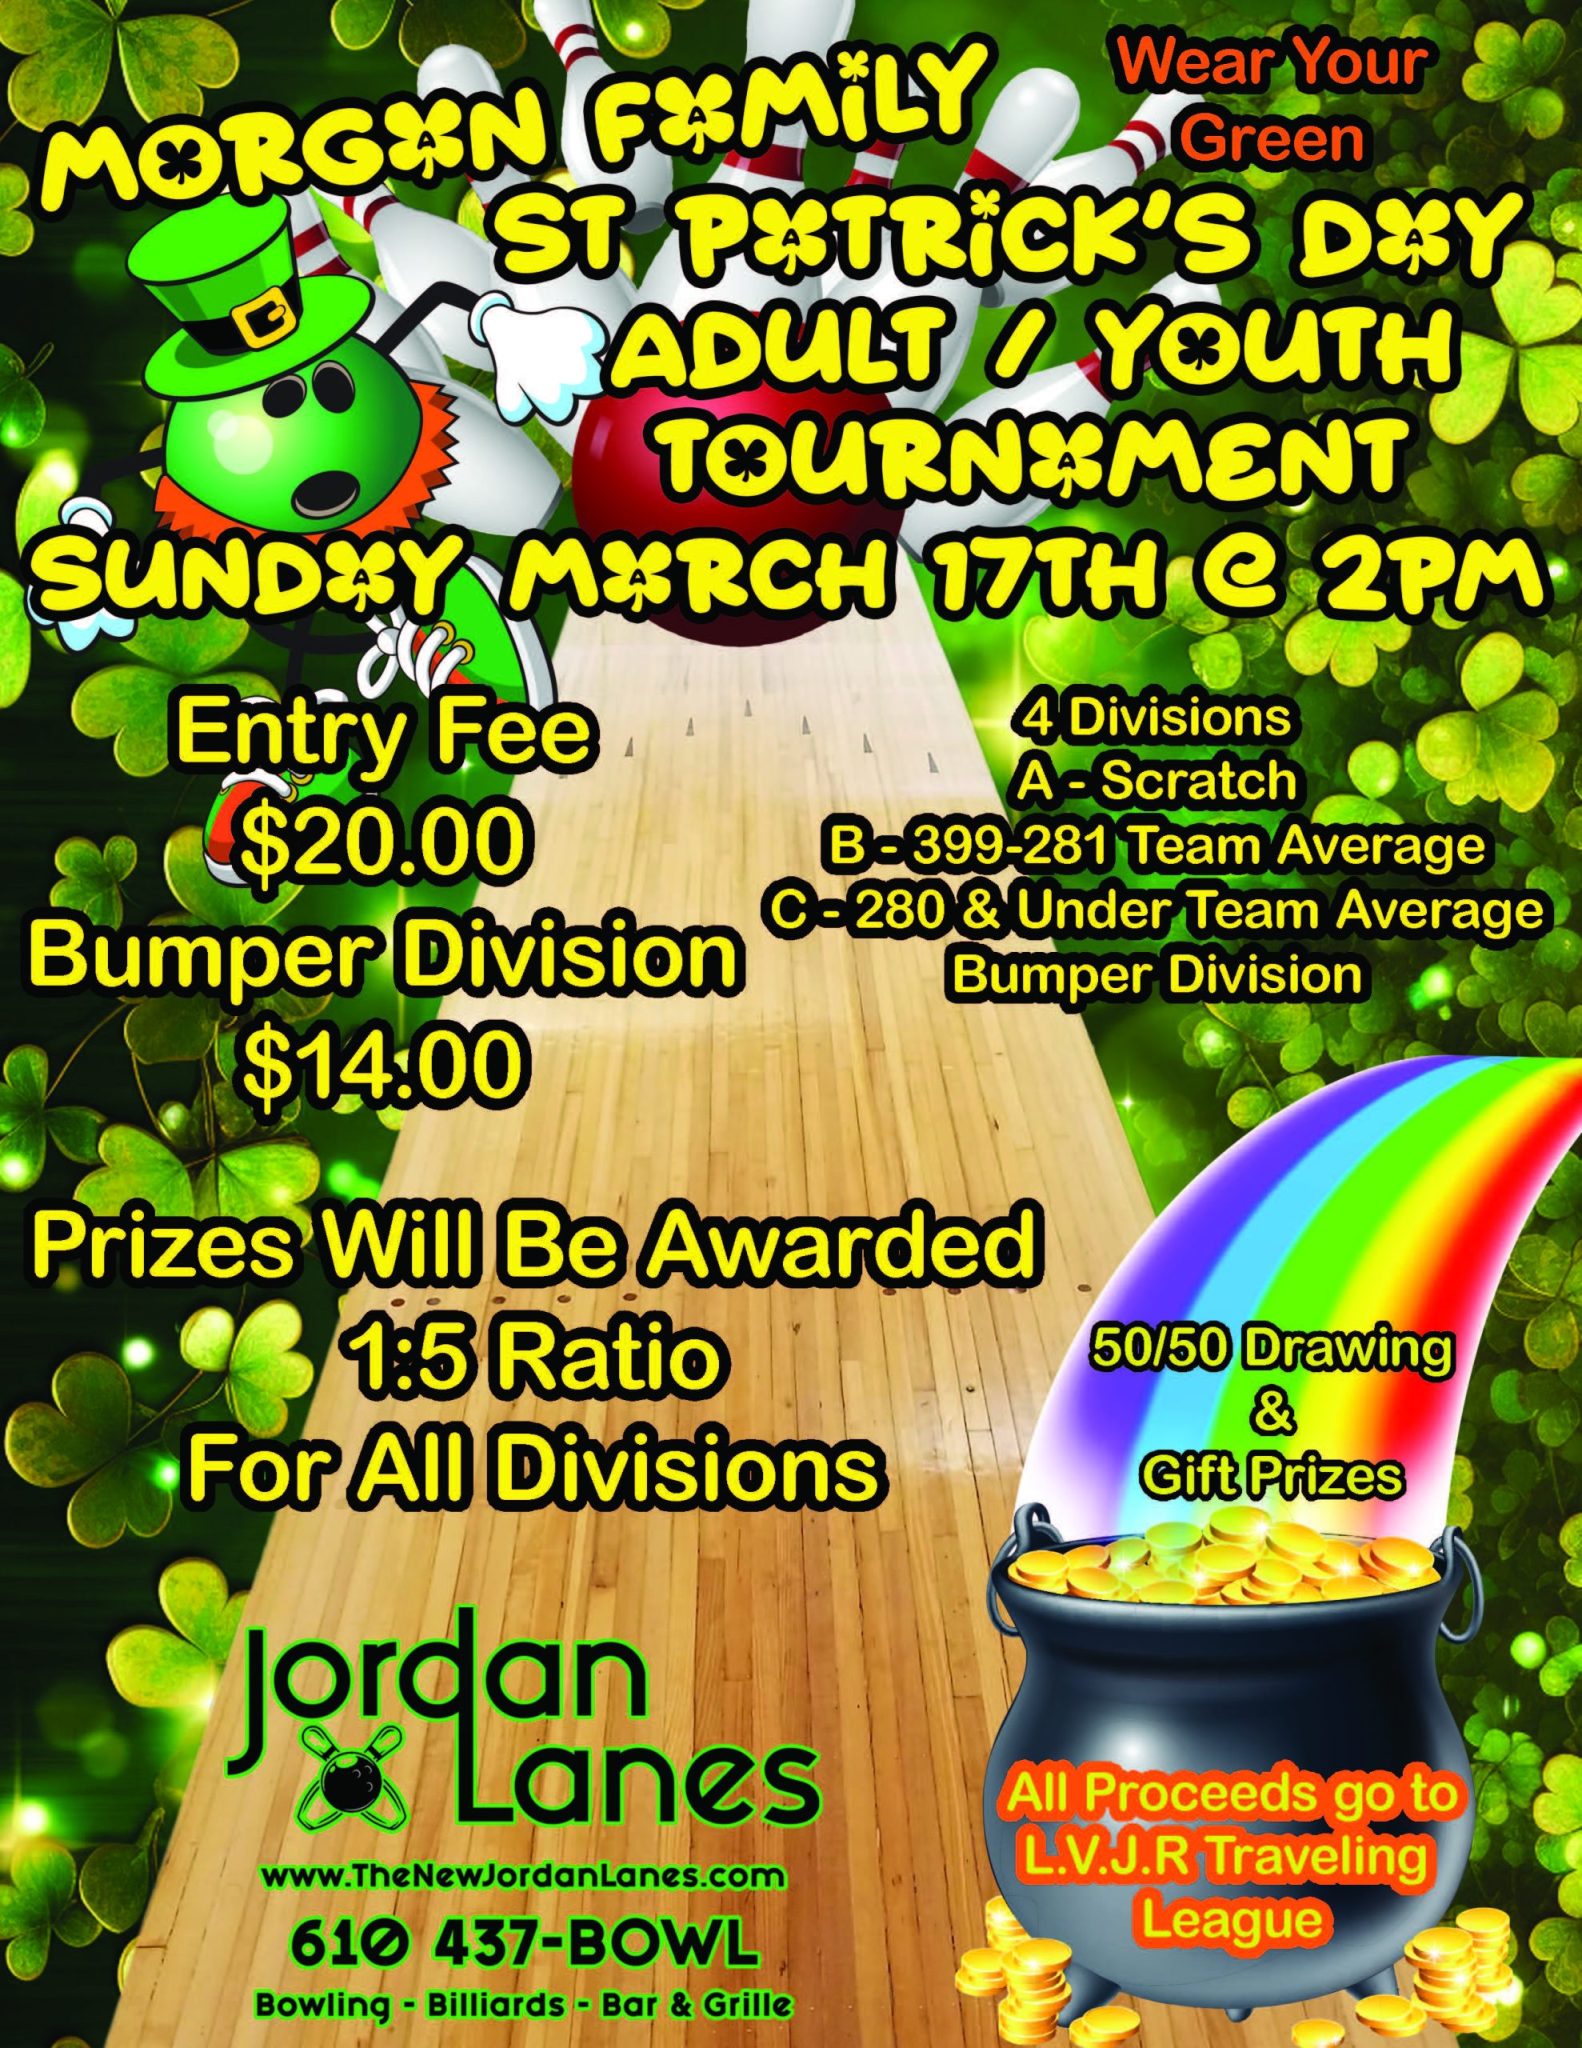 Morgan Family Adult / Youth Tournament 4